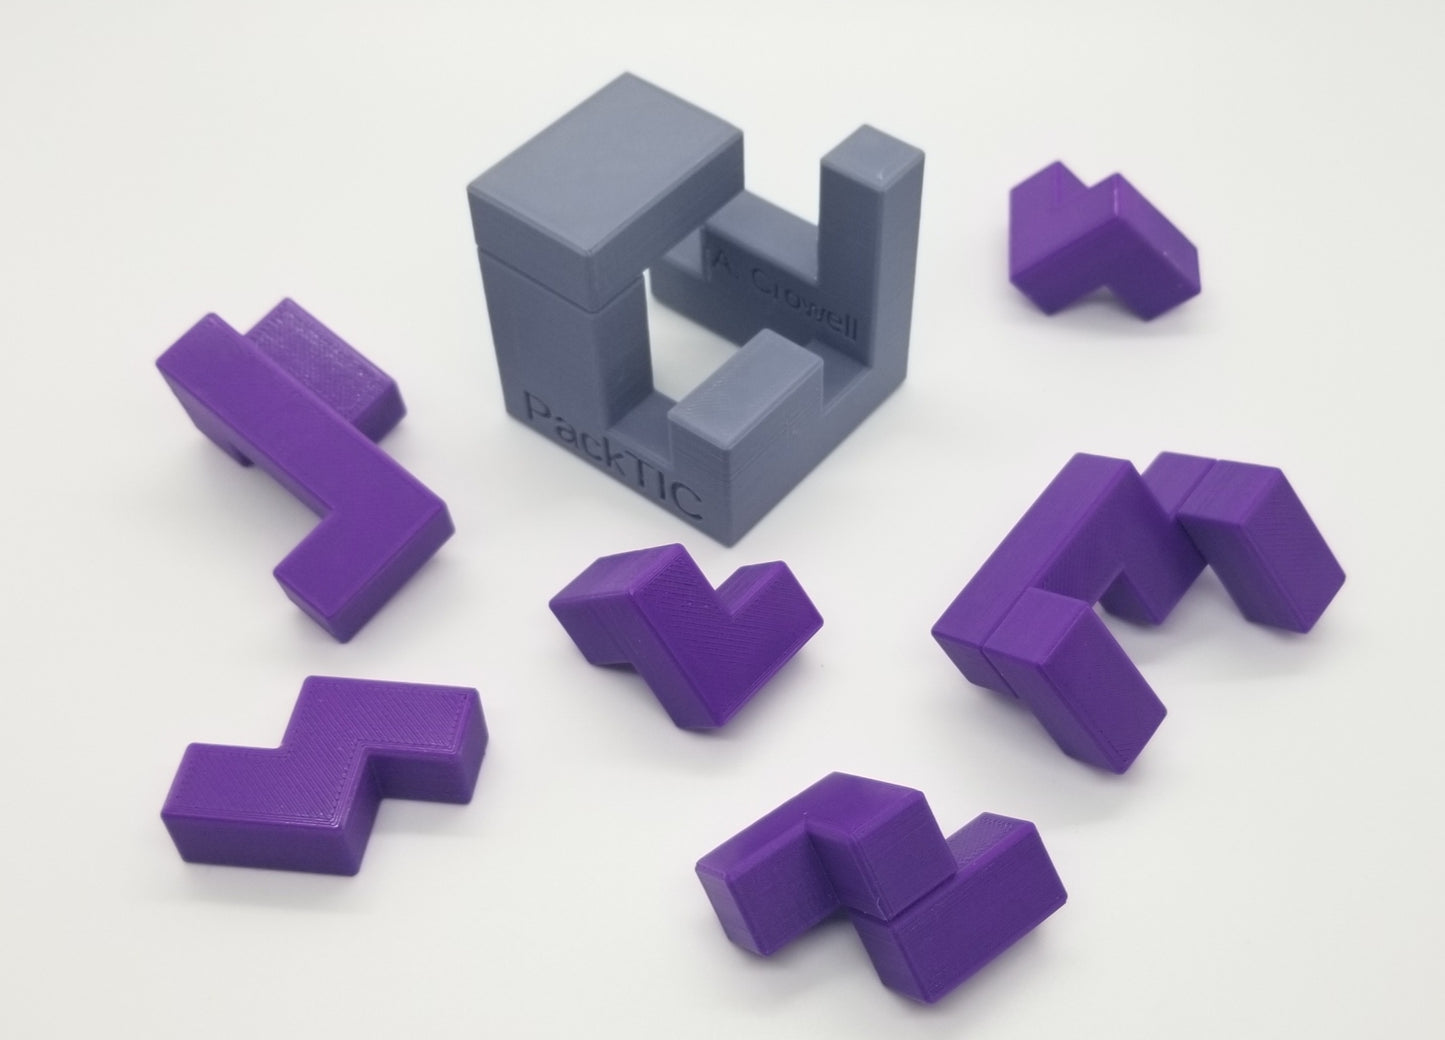 Download 3D Printable STL Files for 10 3D Packing Turning Interlocking Cube Puzzles